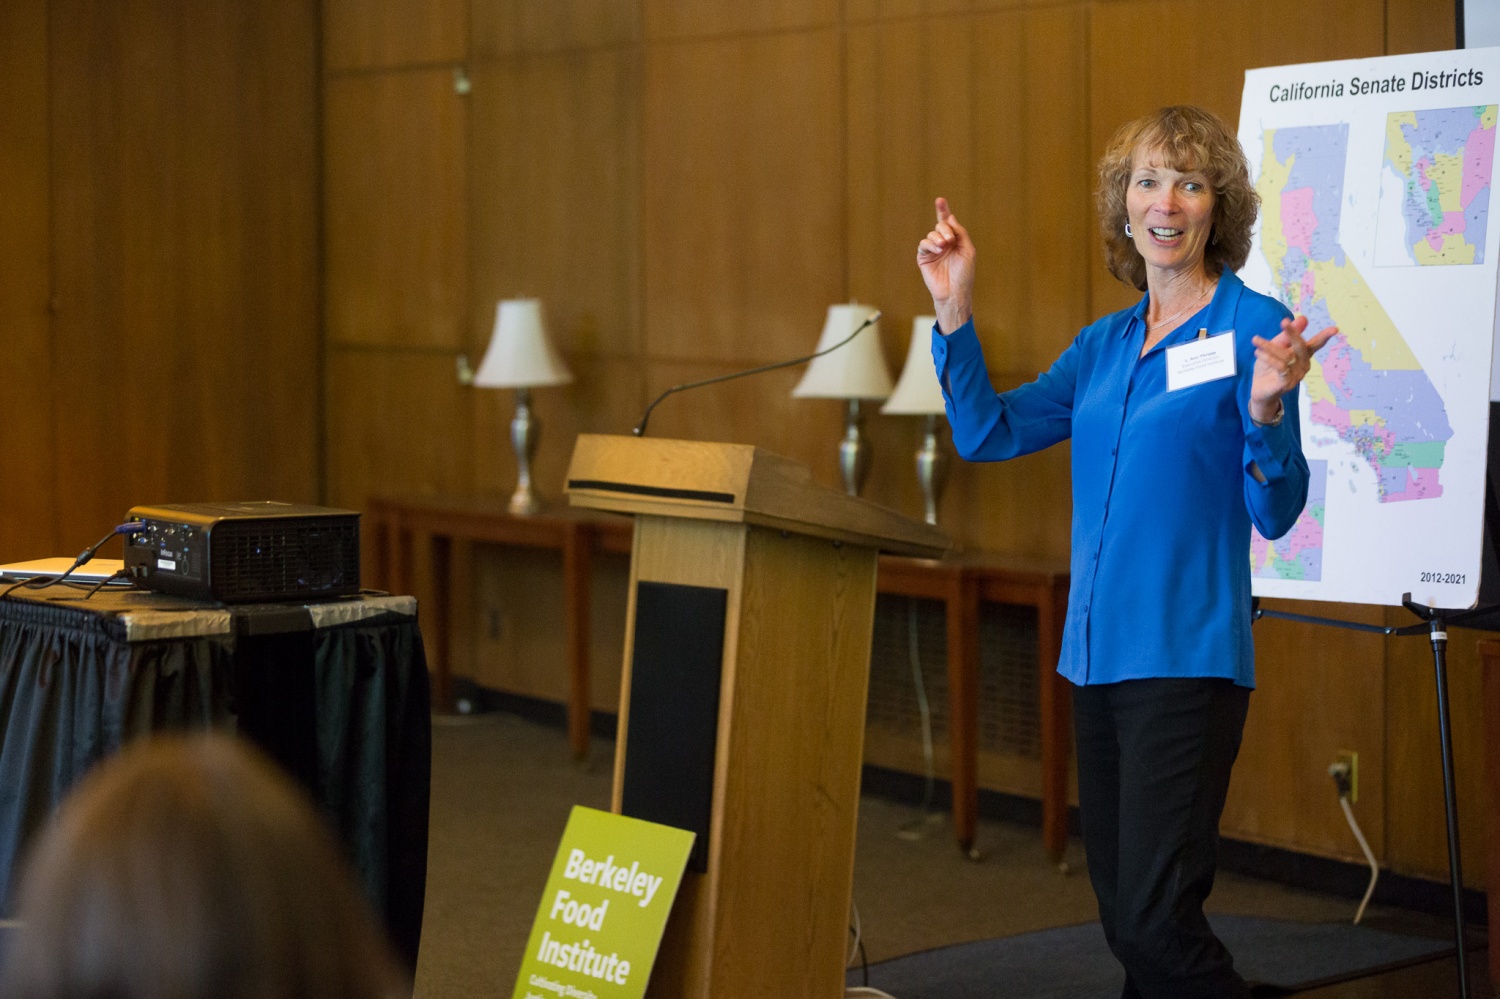 BFI Director Ann Thrupp at Researh-to-Policy Faculty Workshop. Photo by Jonathan Fong.